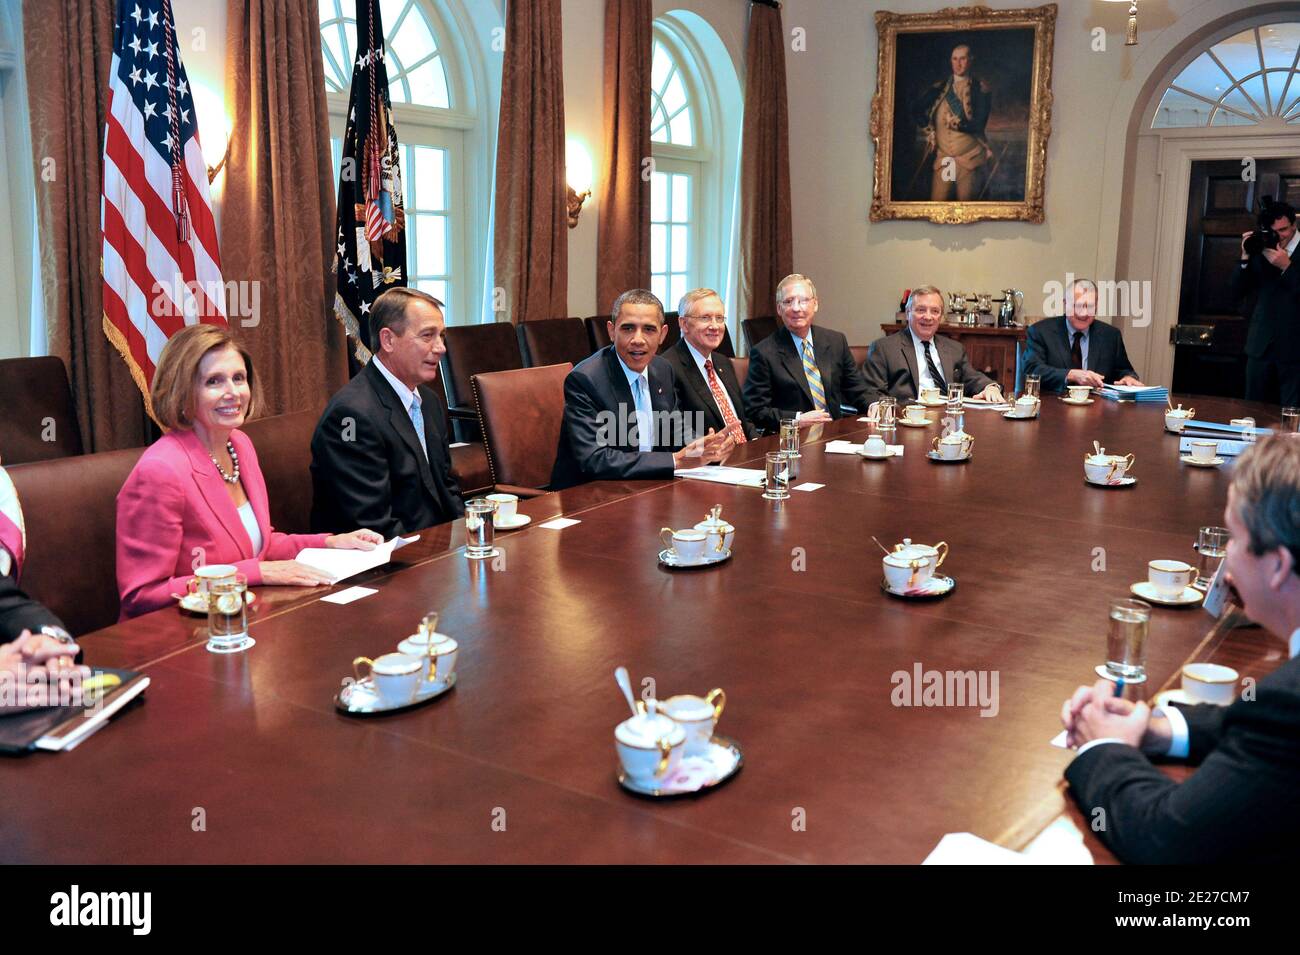 United States President Barack Obama during a photo-op with bipartisan Congressional Leadership in the Cabinet Room of the White House in Washington, D.C., on July 13, 2011, prior to a meeting to discuss the ongoing efforts to find a balanced approach to deficit reduction. From left to right: U.S. House Minority Leader Nancy Pelosi (Democrat of California); Speaker of the U.S. House of Representatives John Boehner (Republican of Ohio); President Obama; U.S. Senate Majority Leader Harry Reid (Democrat of Nevada); U.S. Senate Republican Leader Mitch McConnell (Republican of Kentucky); U.S. Senat Stock Photo